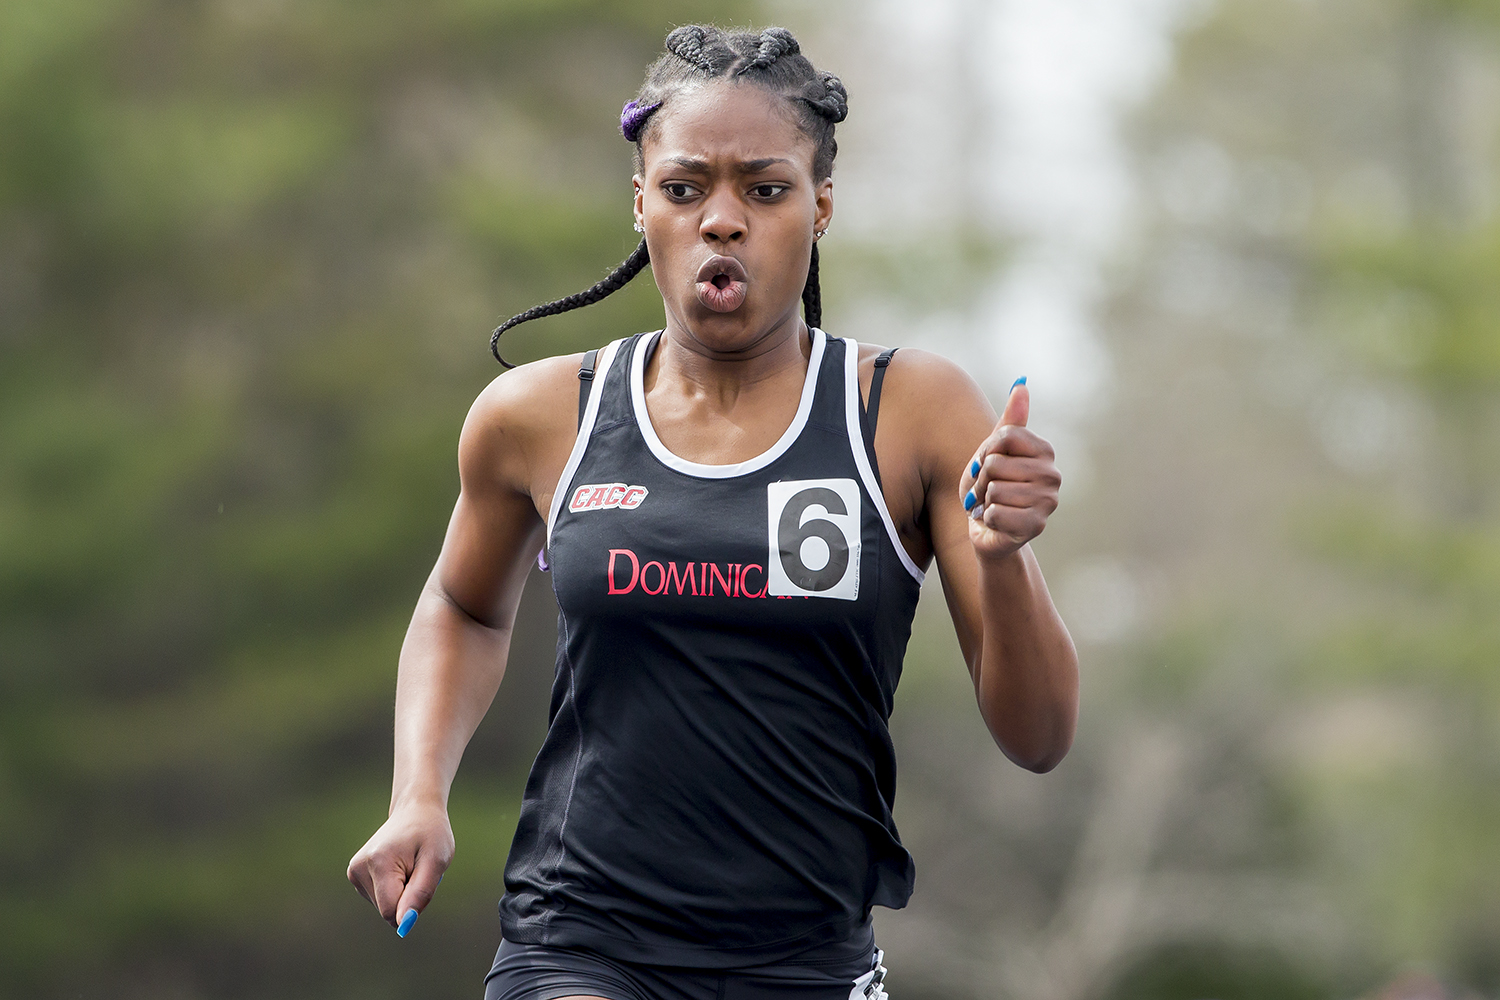 WOMEN'S TRACK COMPETE AT UALBANY WINTER CLASSIC